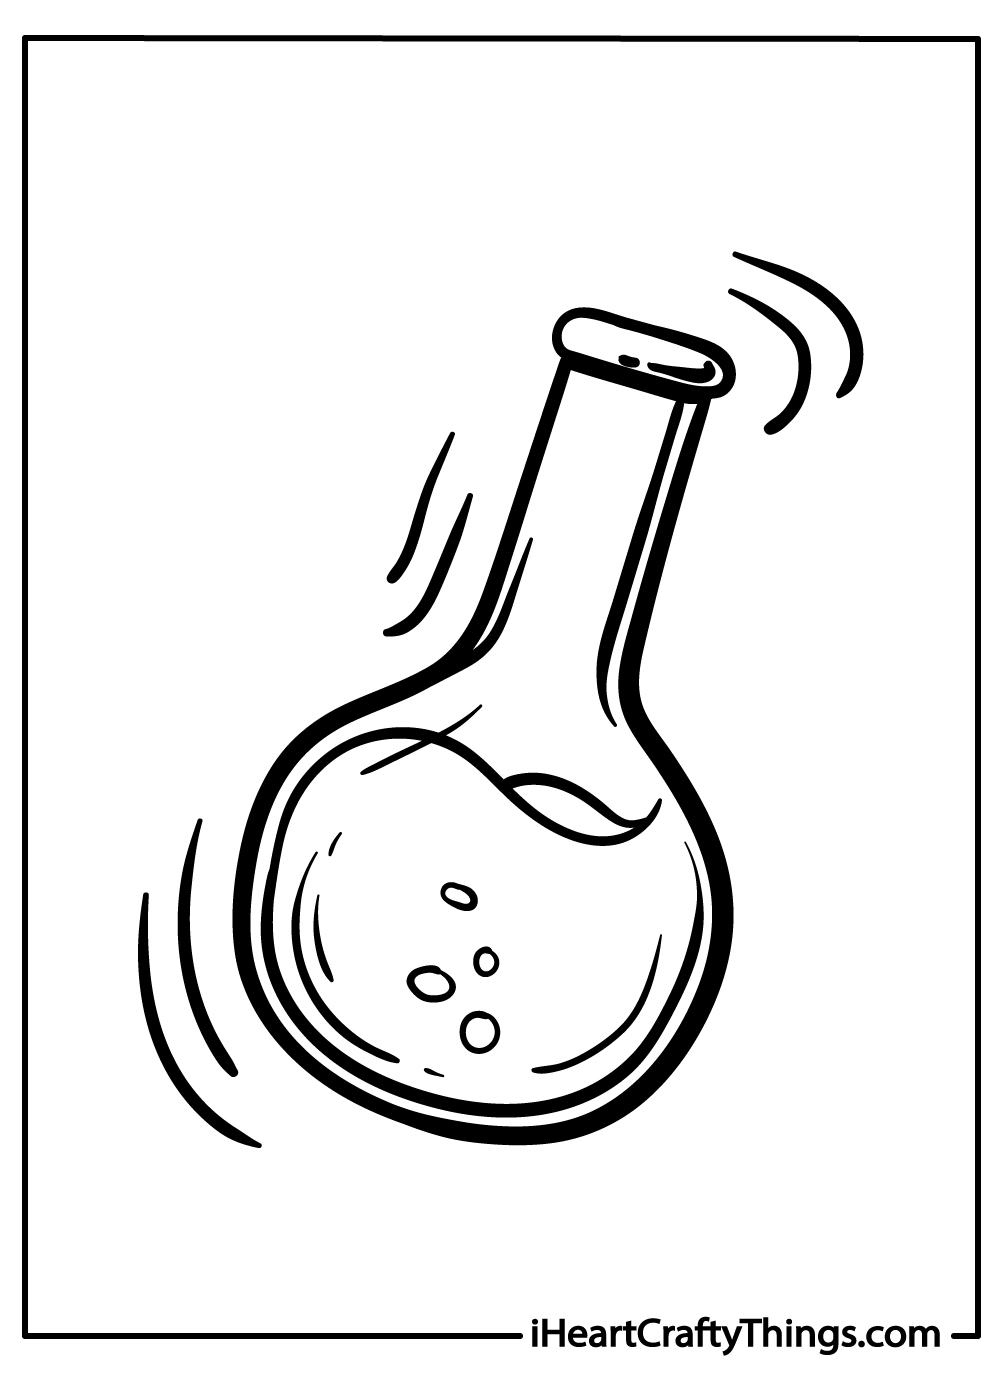 science coloring pages